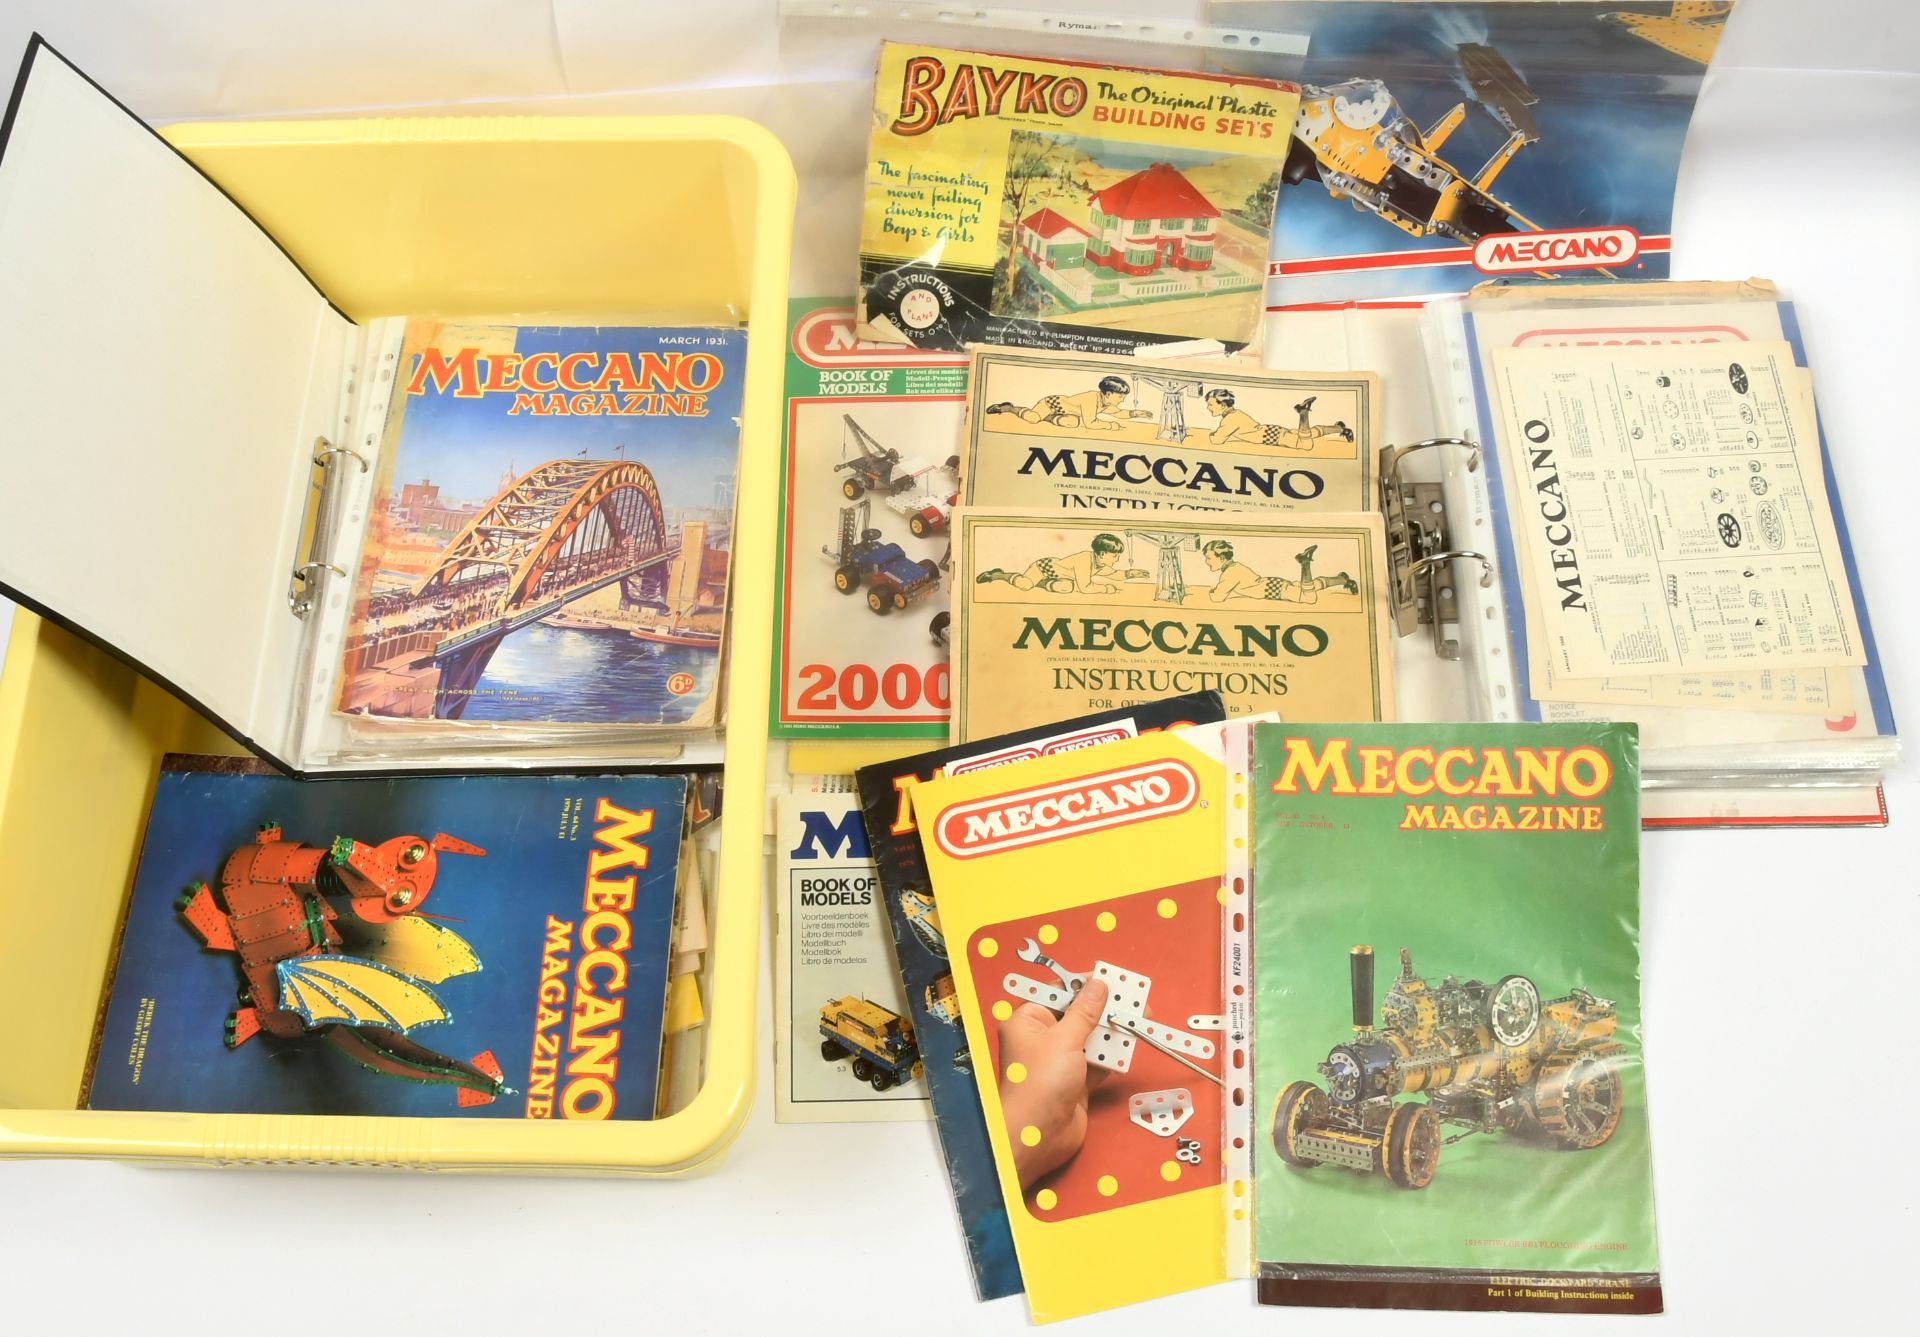 Meccano large quanity of catalogues, leaflets, price lists and associated items i